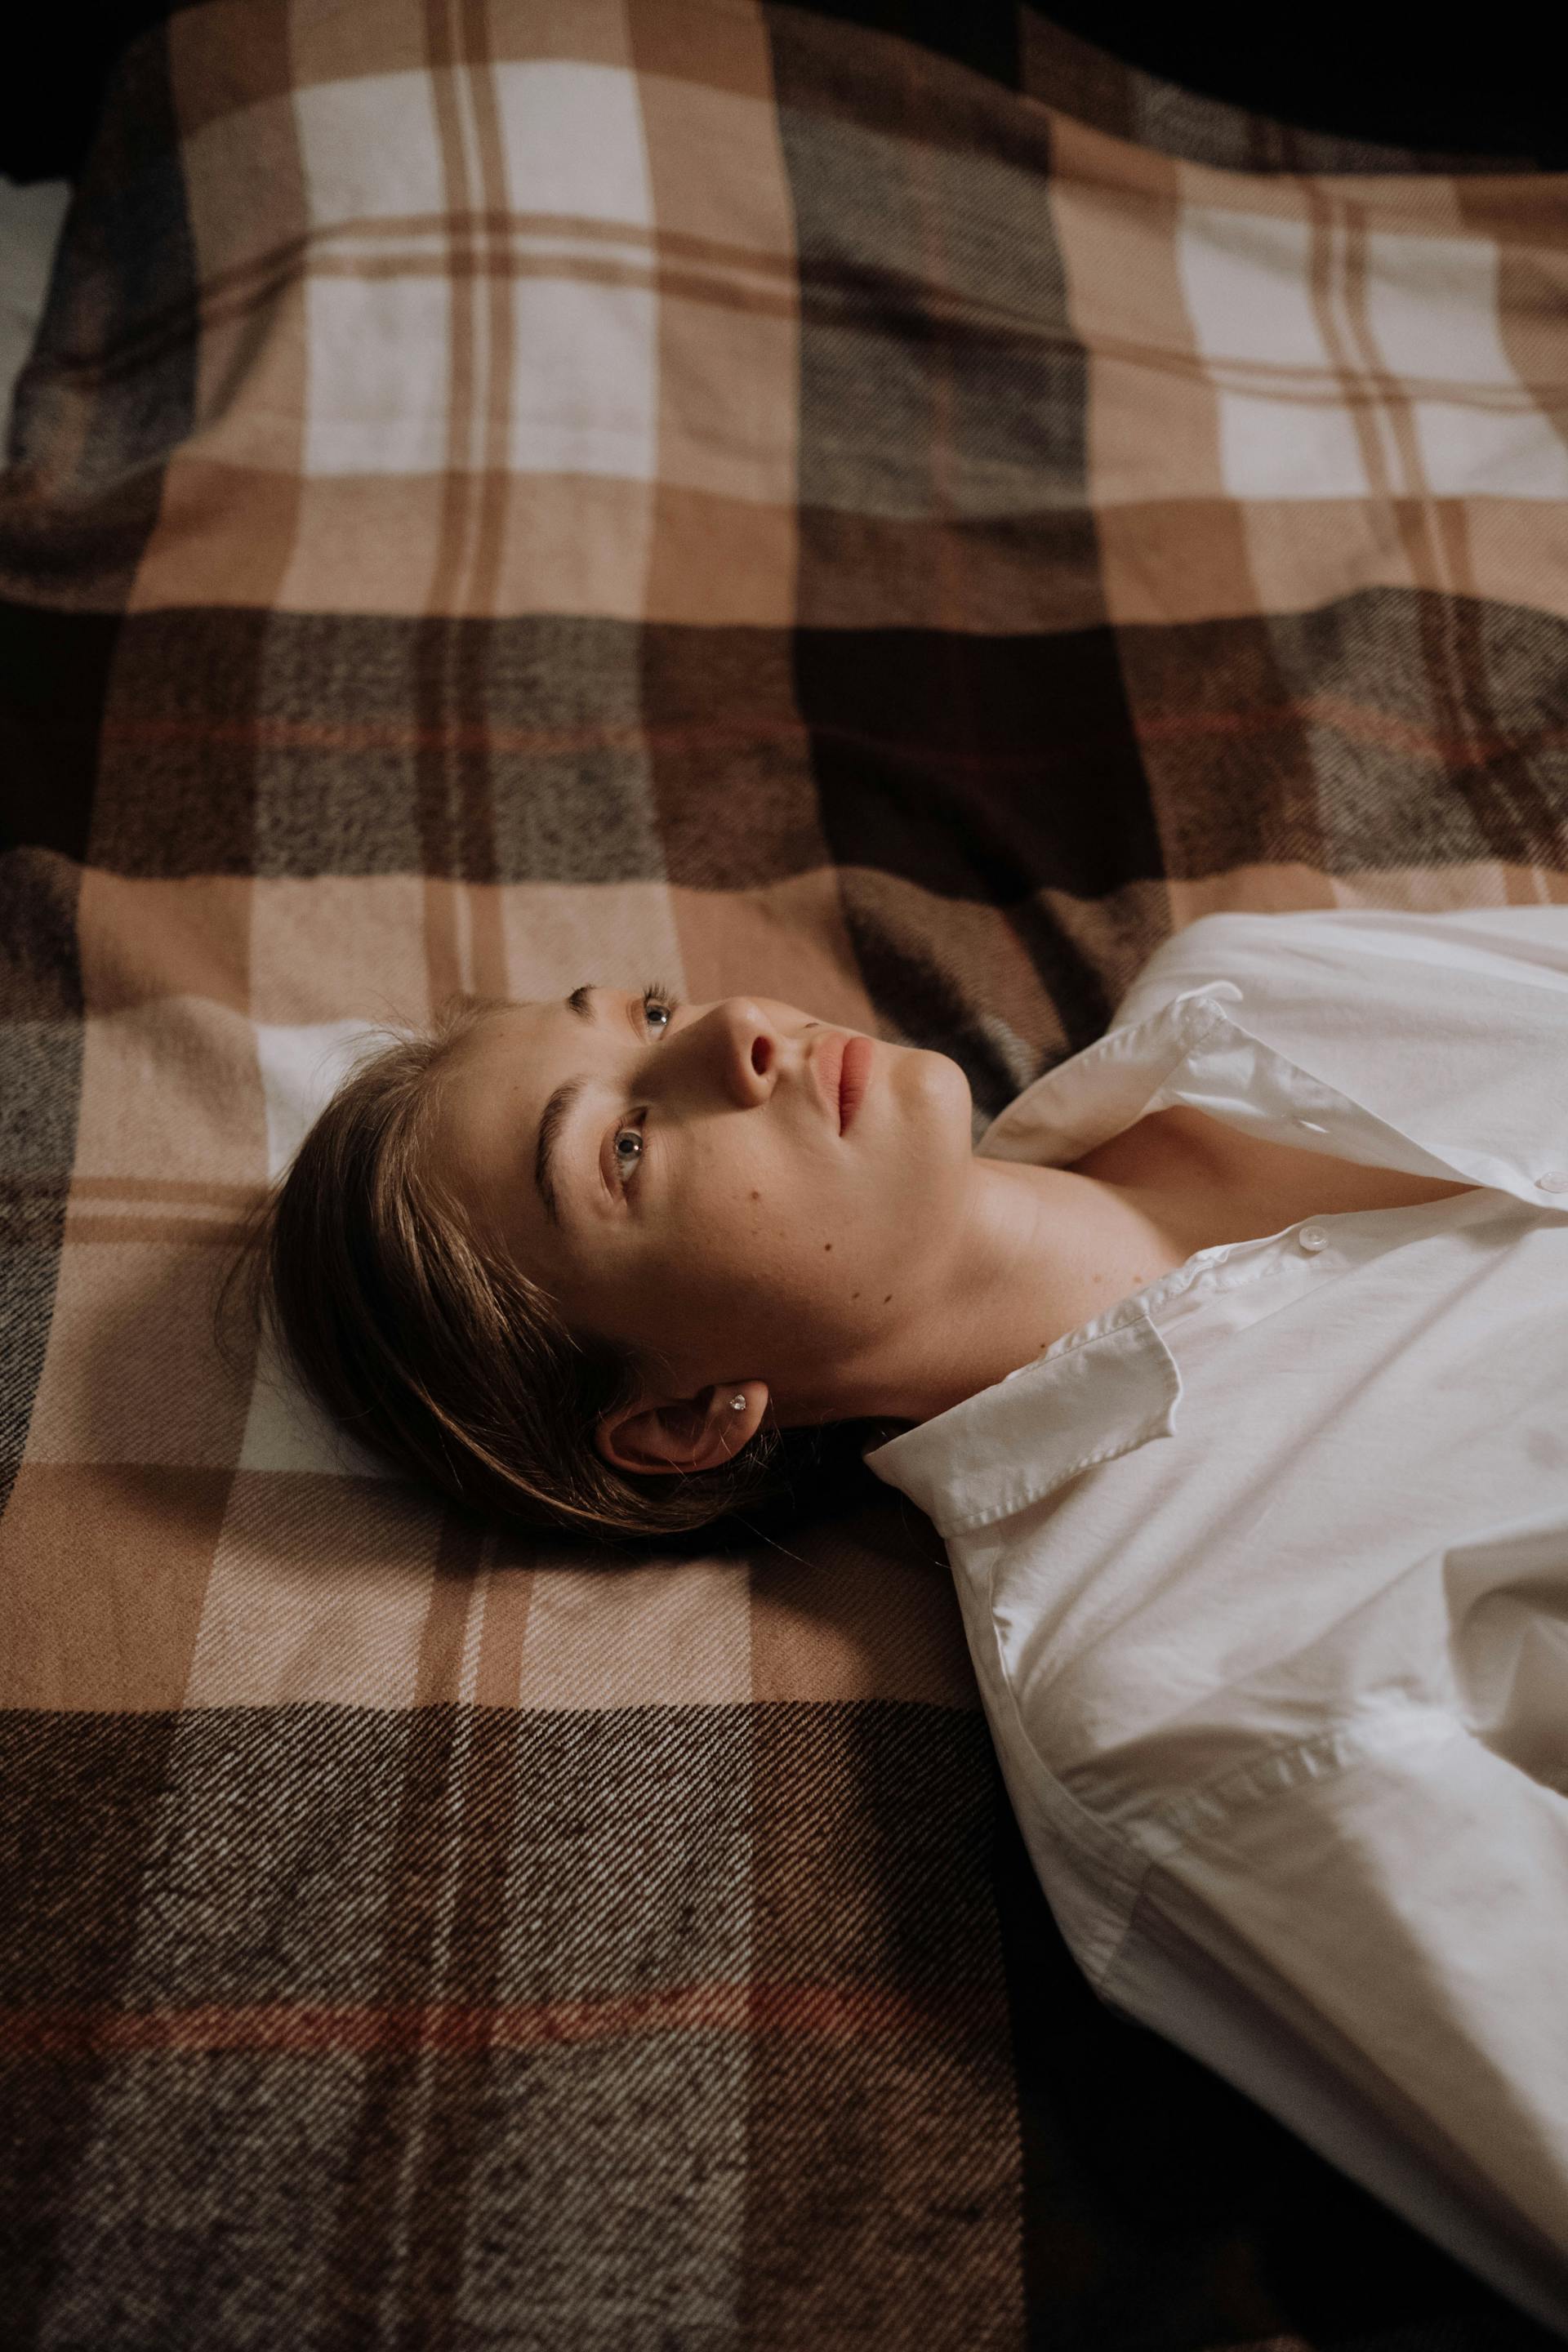 A woman lying on the bed | Source: Pexels